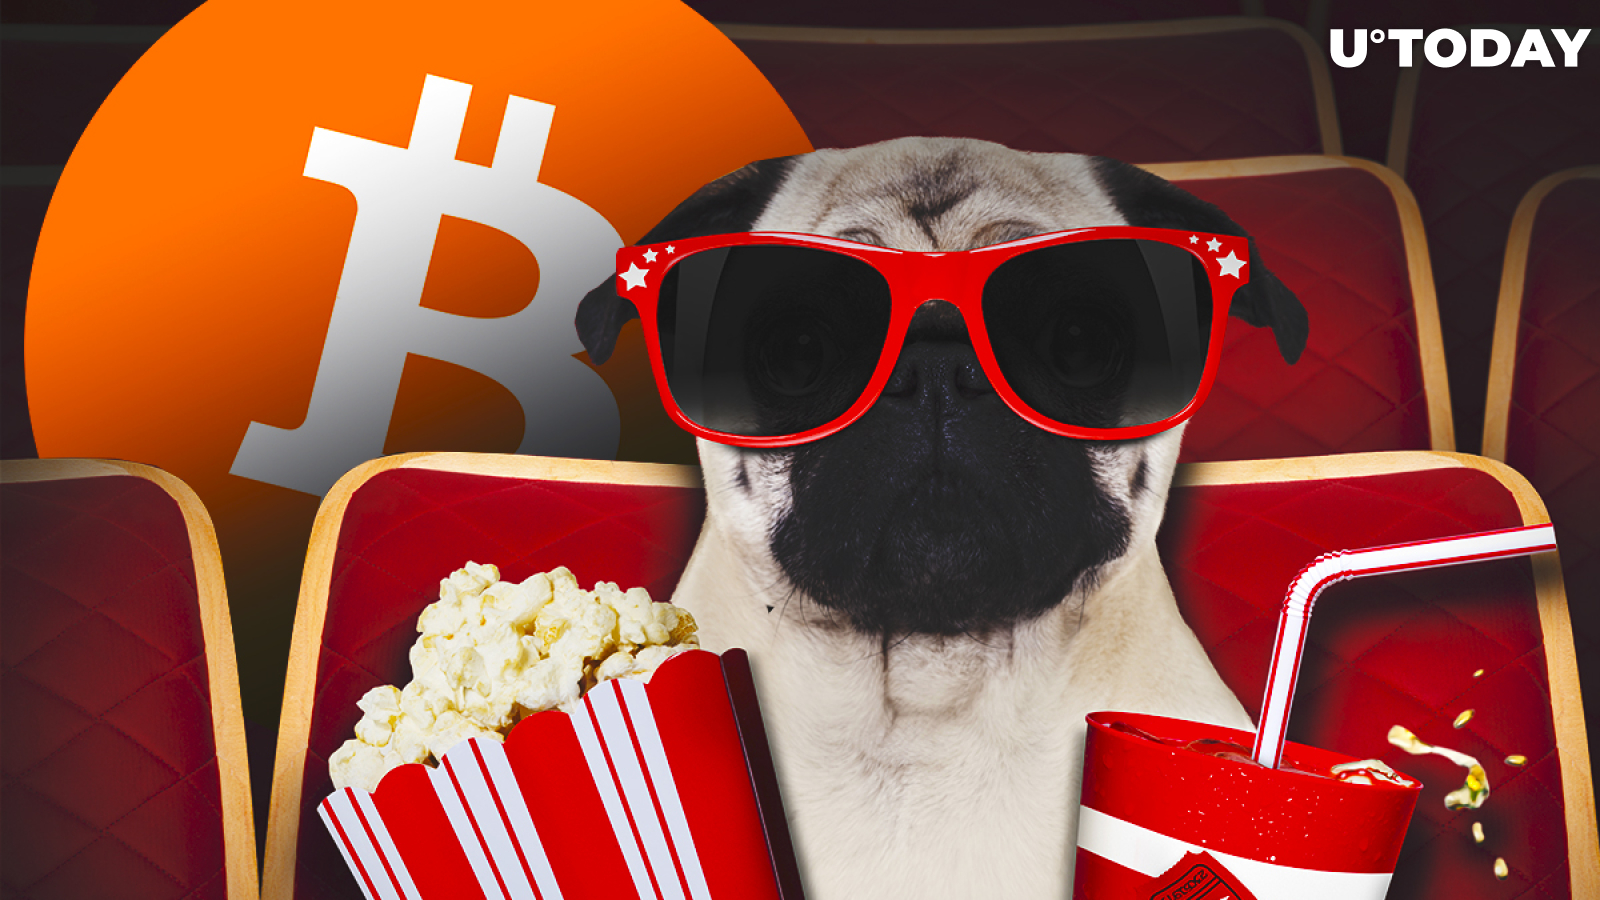 Best 10 Bitcoin Movies and Cryptocurrency Documentaries to Watch in 2019